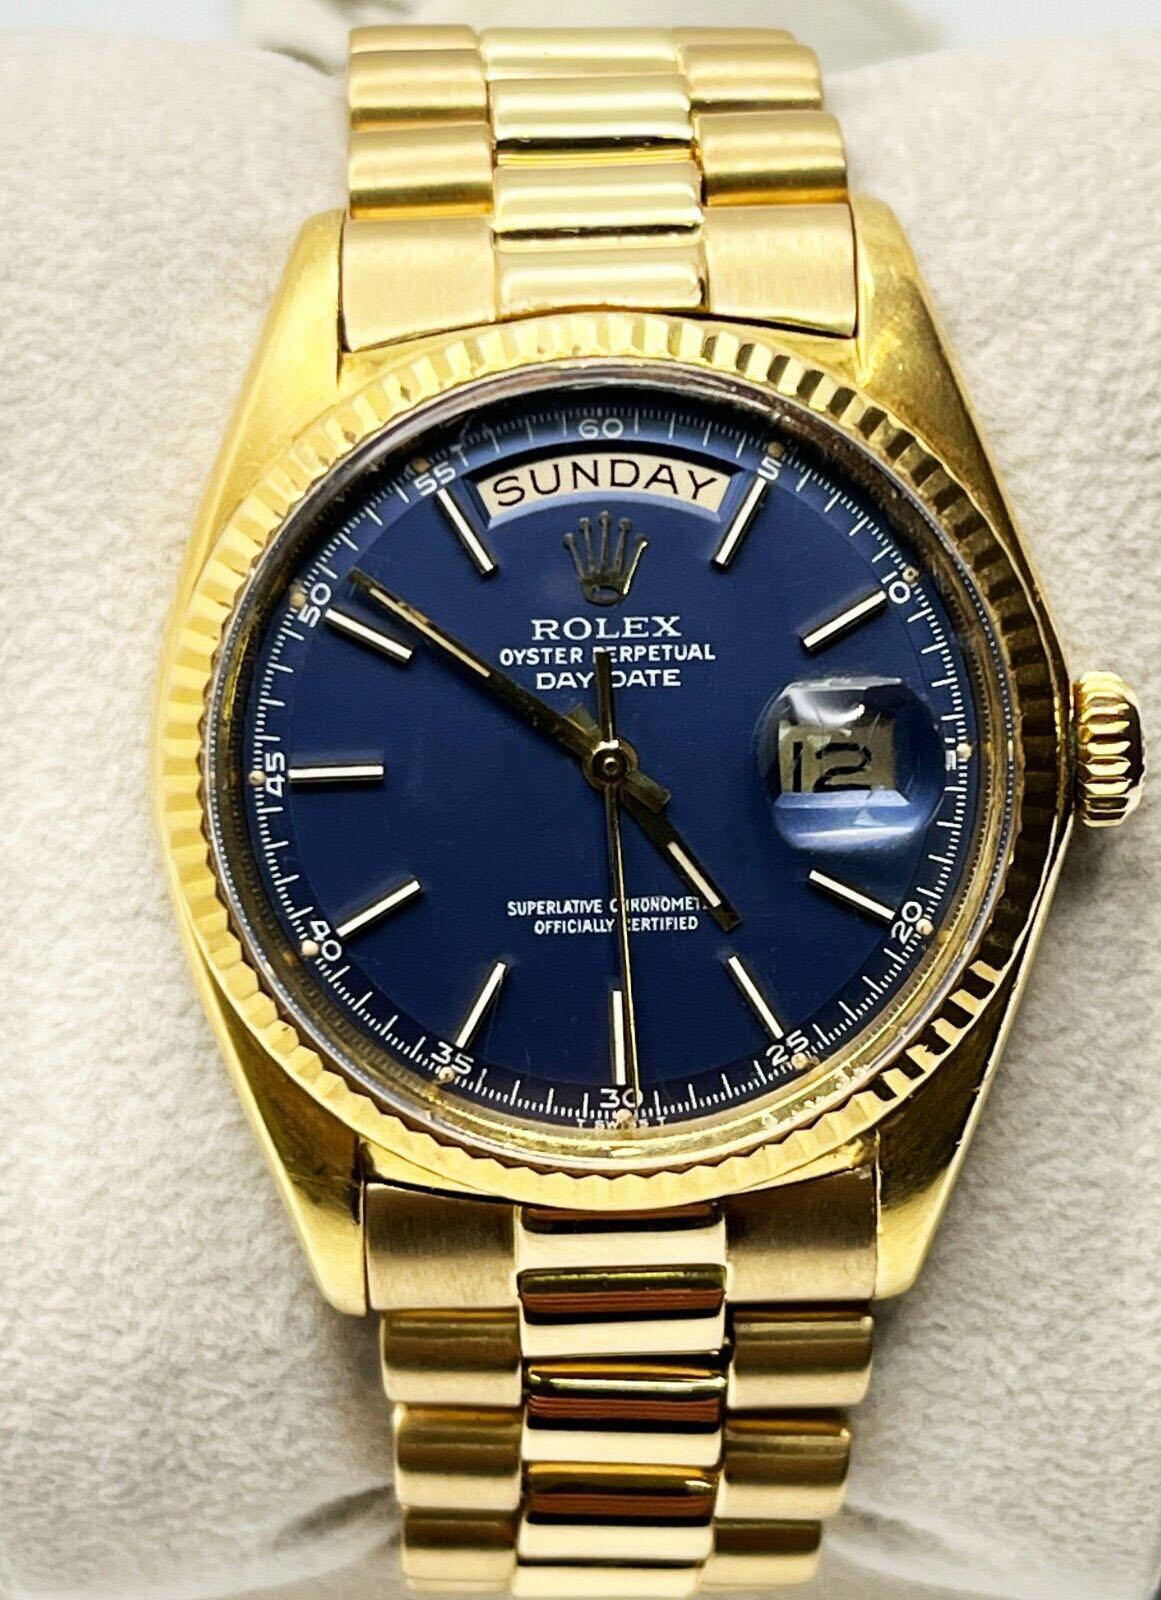 Style Number: 1803

Serial: 1669***

Year: 1967
 
Model: President Day Date
 
Case Material: 18K Yellow Gold
 
Band: 18K Yellow Gold
 
Bezel: 18K Yellow Gold
 
Dial: Rare Factory Blue Pie Pan Dial
 
Face: Acrylic 
 
Case Size: 36mm
 
Includes: